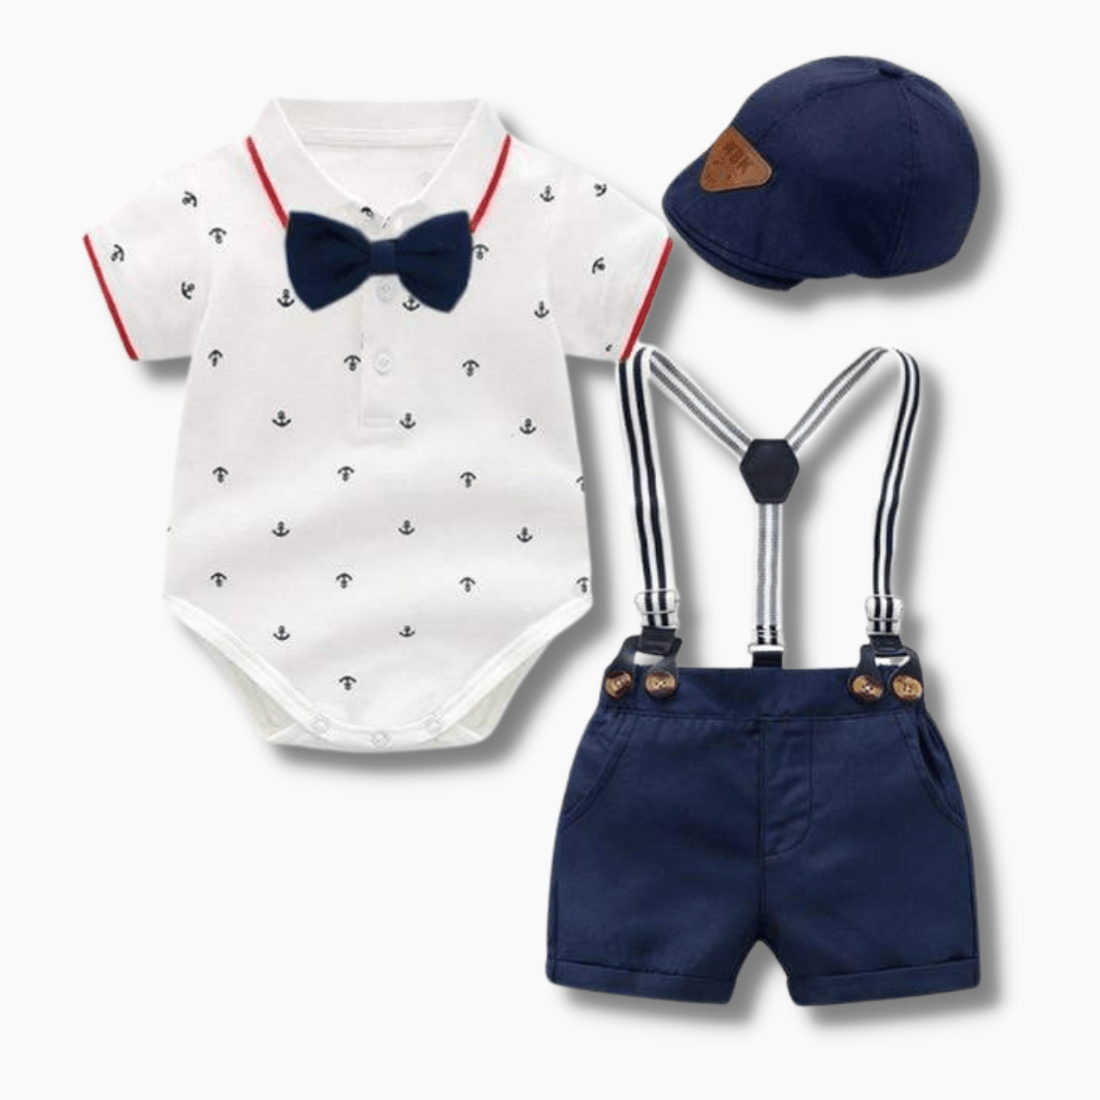 Boy's Clothing Anchor Print Romper Outfit